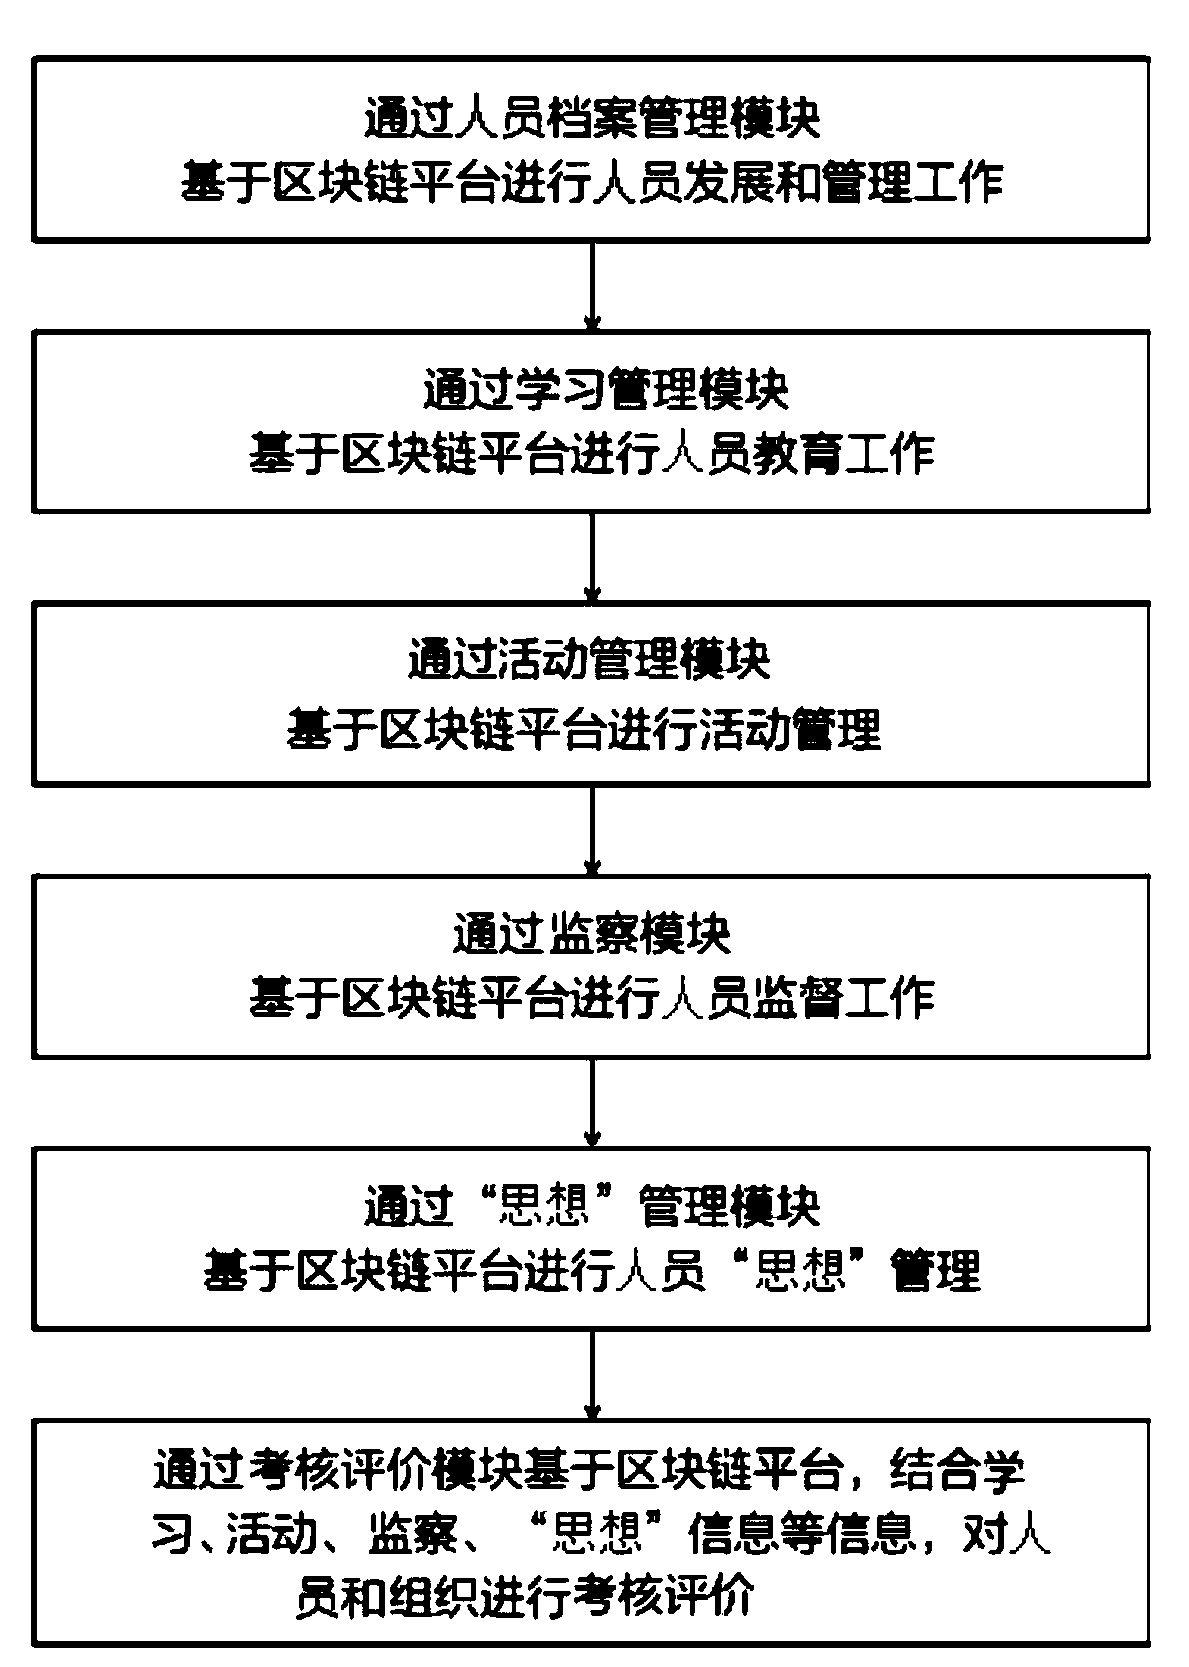 Information management method and system based on block chain